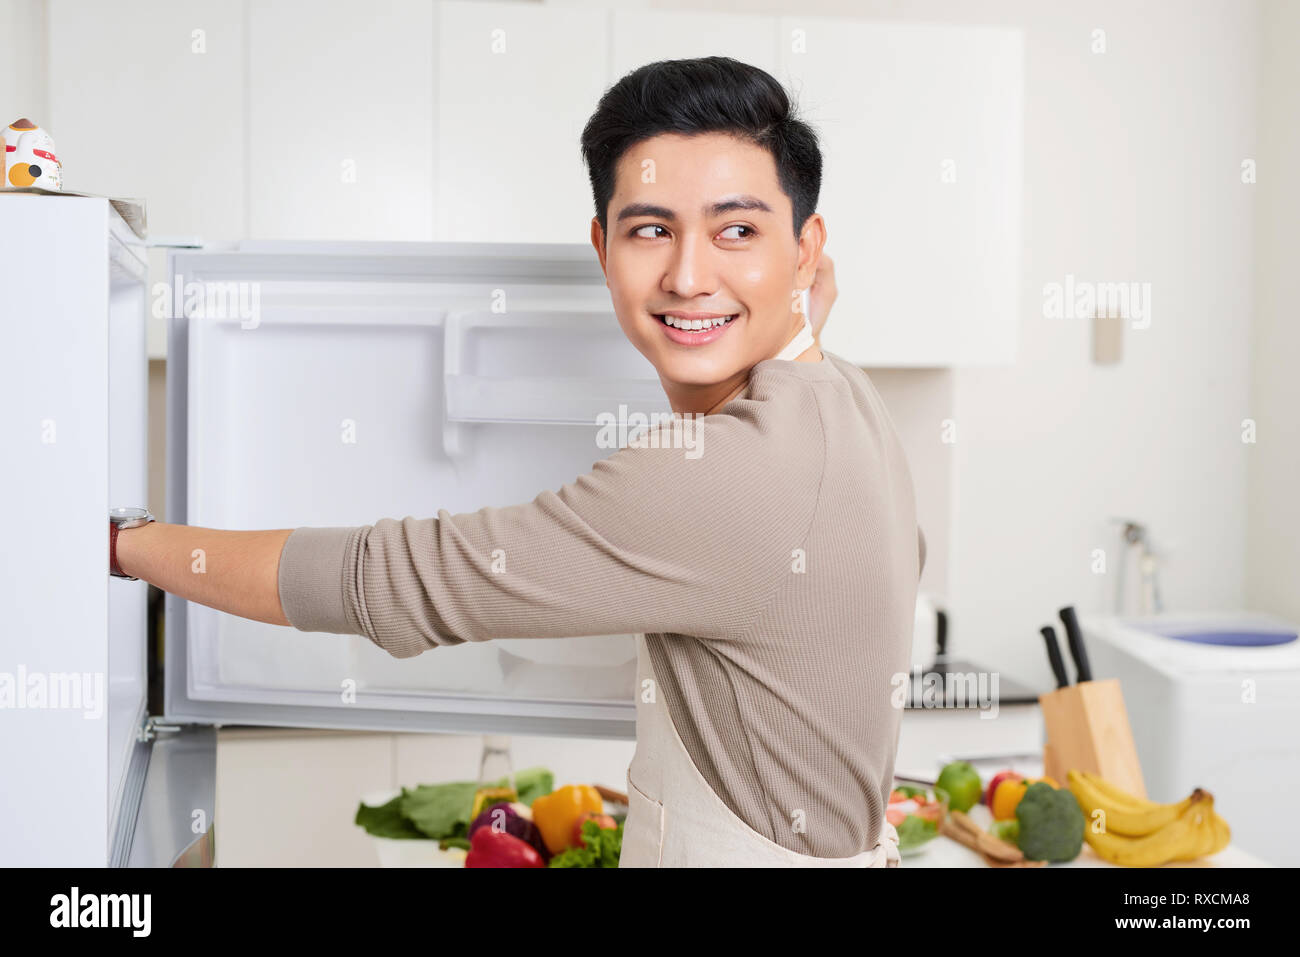 Abstract hand a young man is opening a refrigerator door Stock Photo